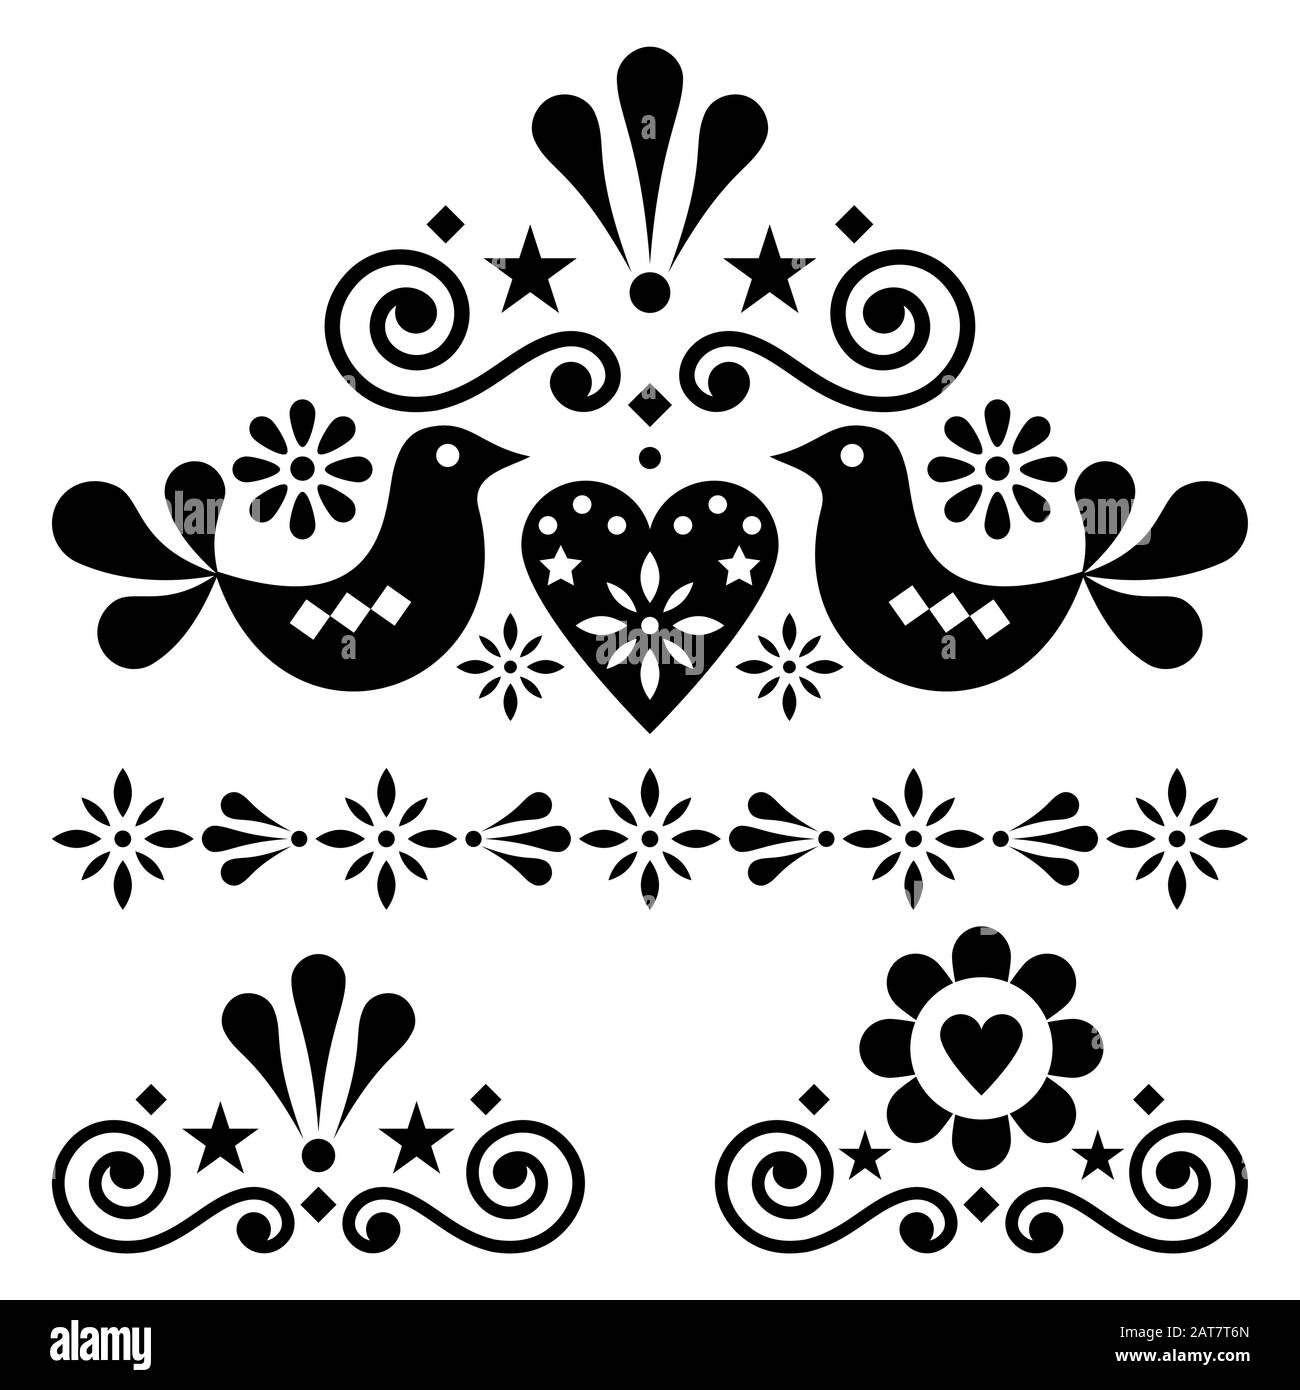 Scandinavian folk art vector design set - single patterns collection, cute floral ornament with flowers in black on white background Stock Vector